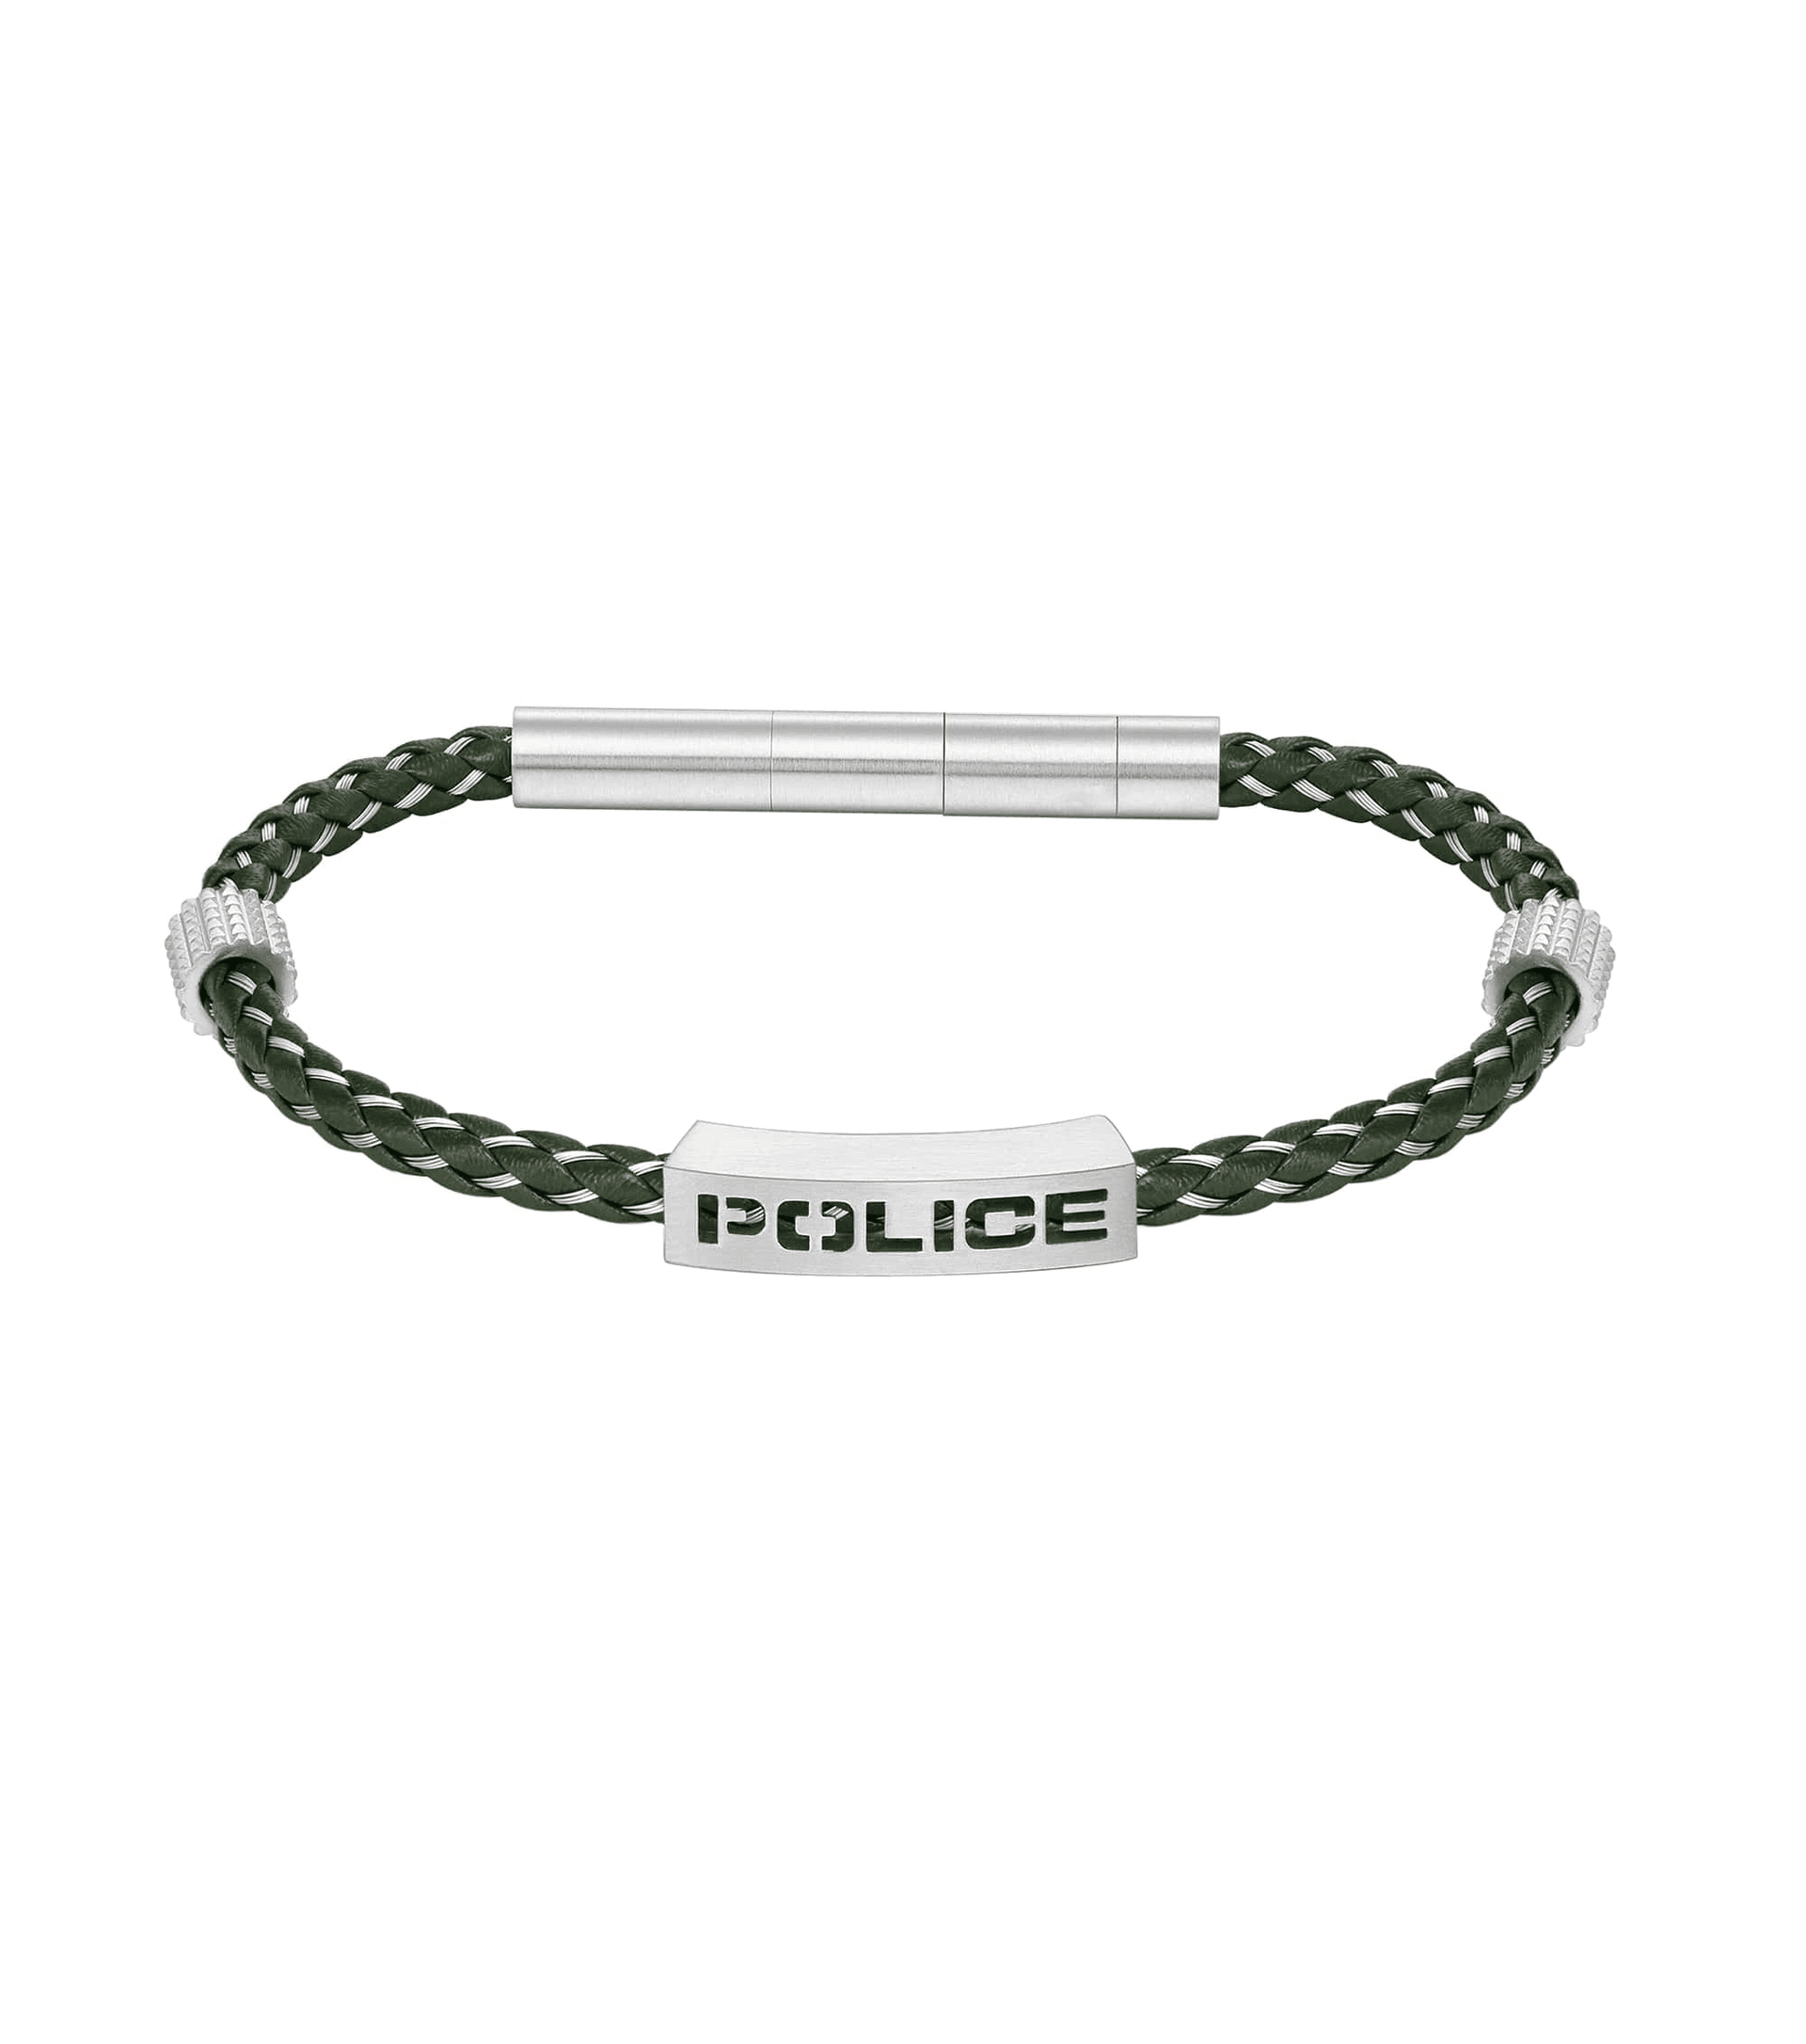 Whole Stainless Steel Bracelet Police Bracelet Police Wife Bangle Police  Officer Graduate Gifts Jewelrywomen275y From Geroq, $4.28 | DHgate.Com